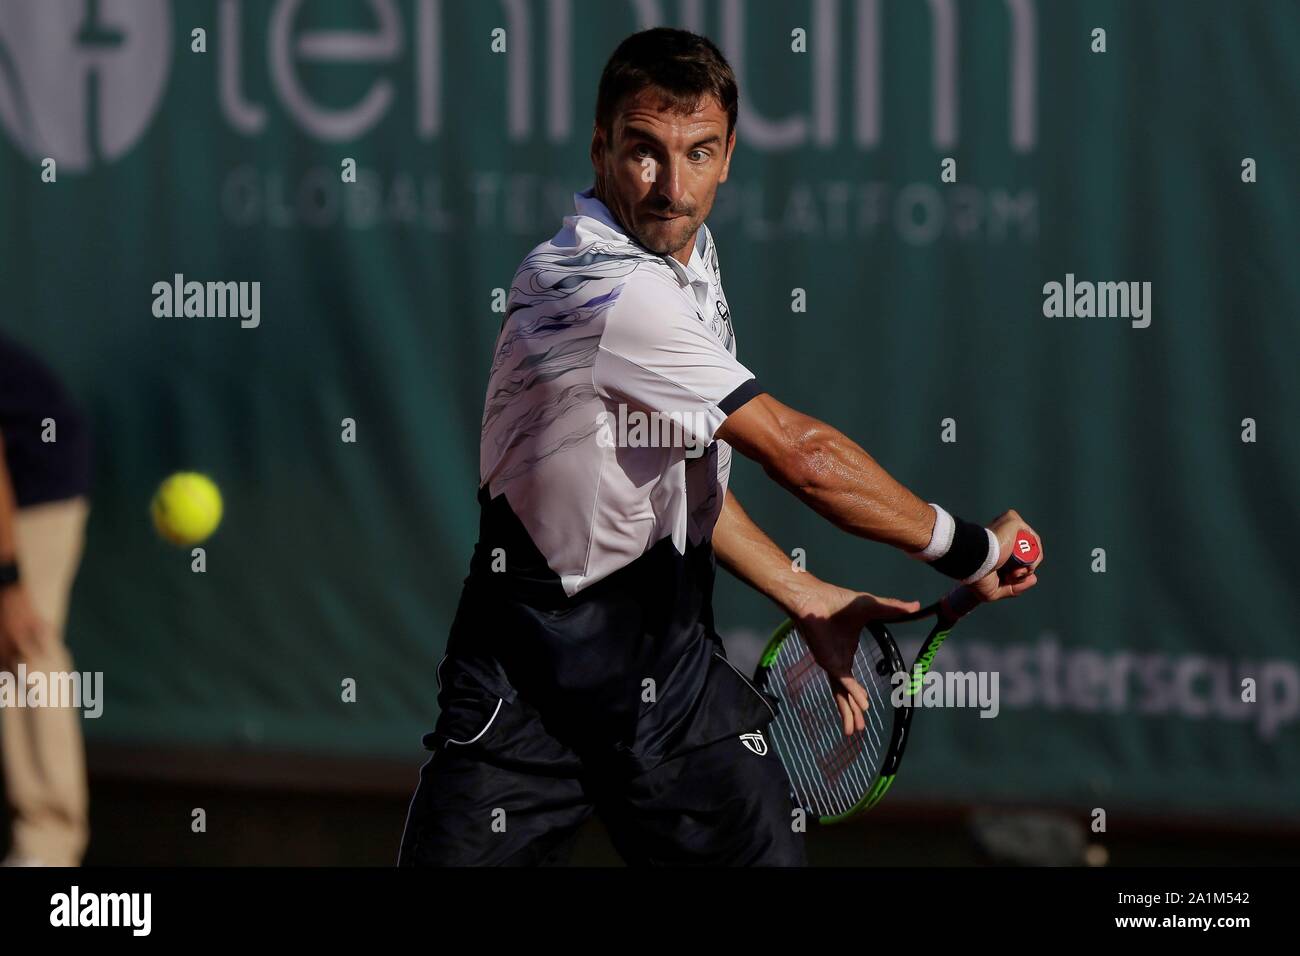 malaga-spain-27th-sep-2019-tommy-robredo-of-spain-in-action-against-his-compatriot-feliciano-lopez-during-the-first-match-of-the-4th-senior-master-cup-tennis-tournament-in-marbella-spain-27-september-2019-credit-carlos-diazefealamy-live-news-2A1M542.jpg